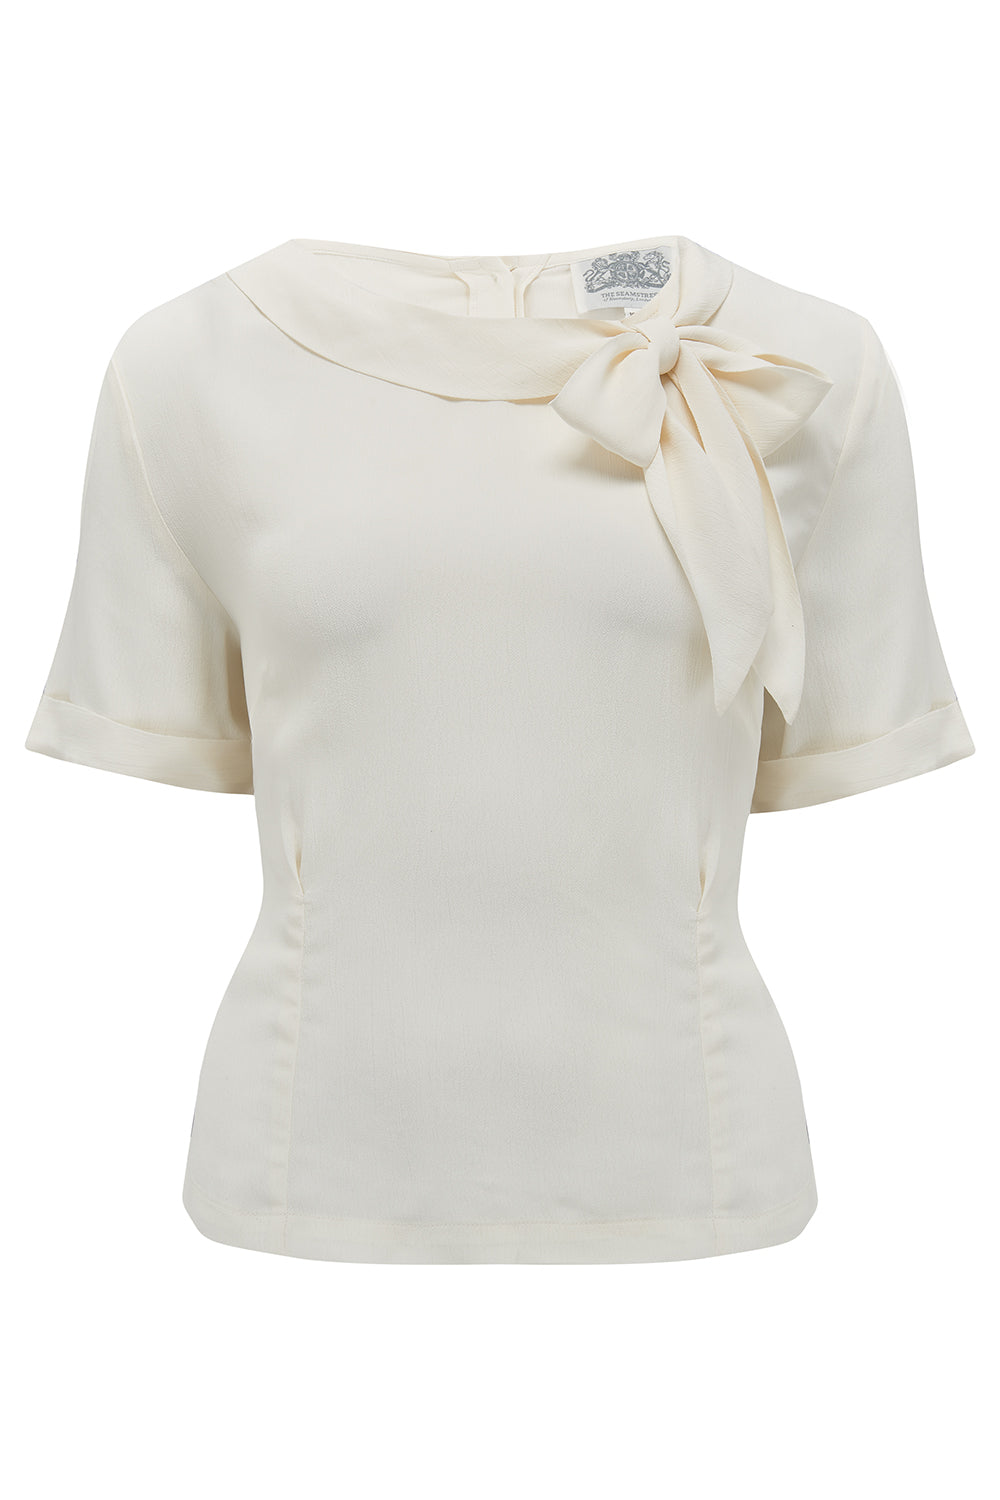 Cindy Blouse In Cream , Classic 1940s Vintage Inspired Style - CC41, Goodwood Revival, Twinwood Festival, Viva Las Vegas Rockabilly Weekend Rock n Romance The Seamstress Of Bloomsbury